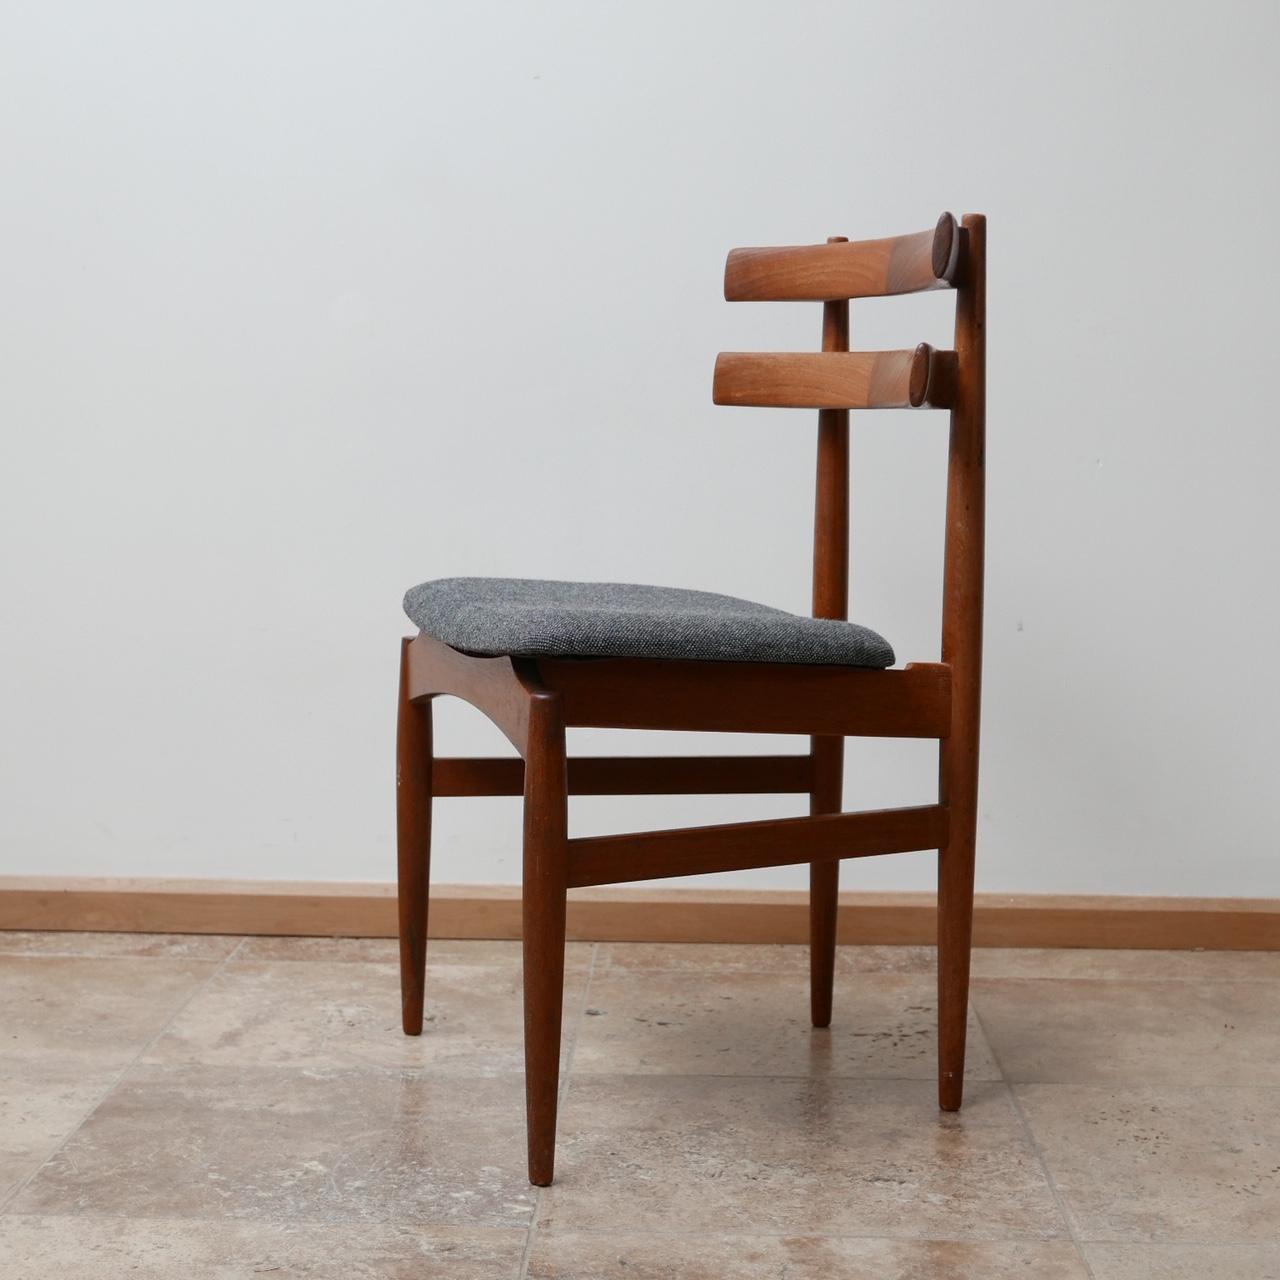 Teak Midcentury Dining Chairs by Poul Hundevad 4